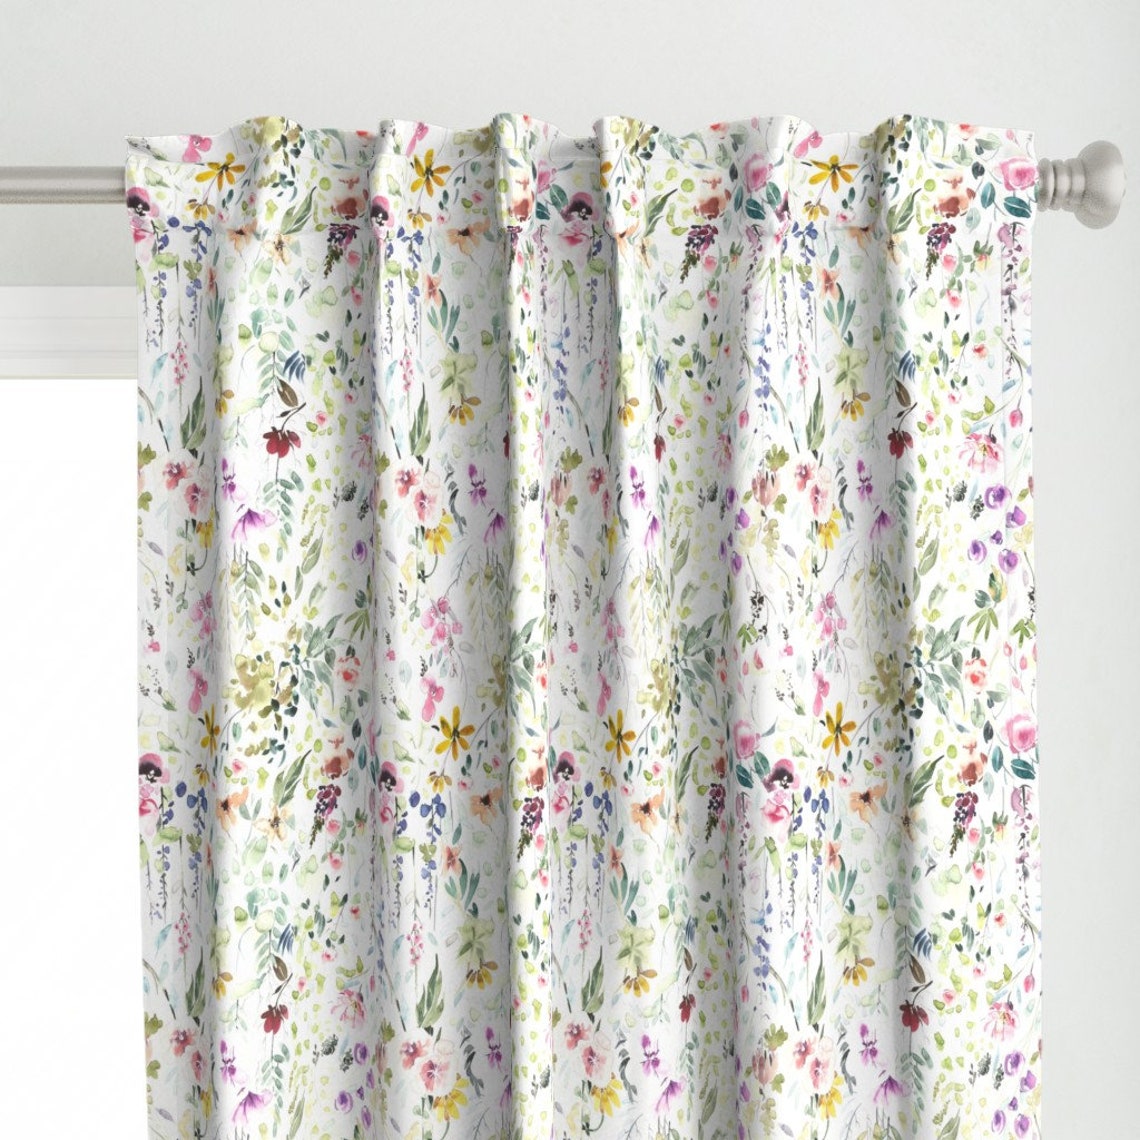 Colorful Spring Curtain Panel Wildflower Meadow by | Etsy